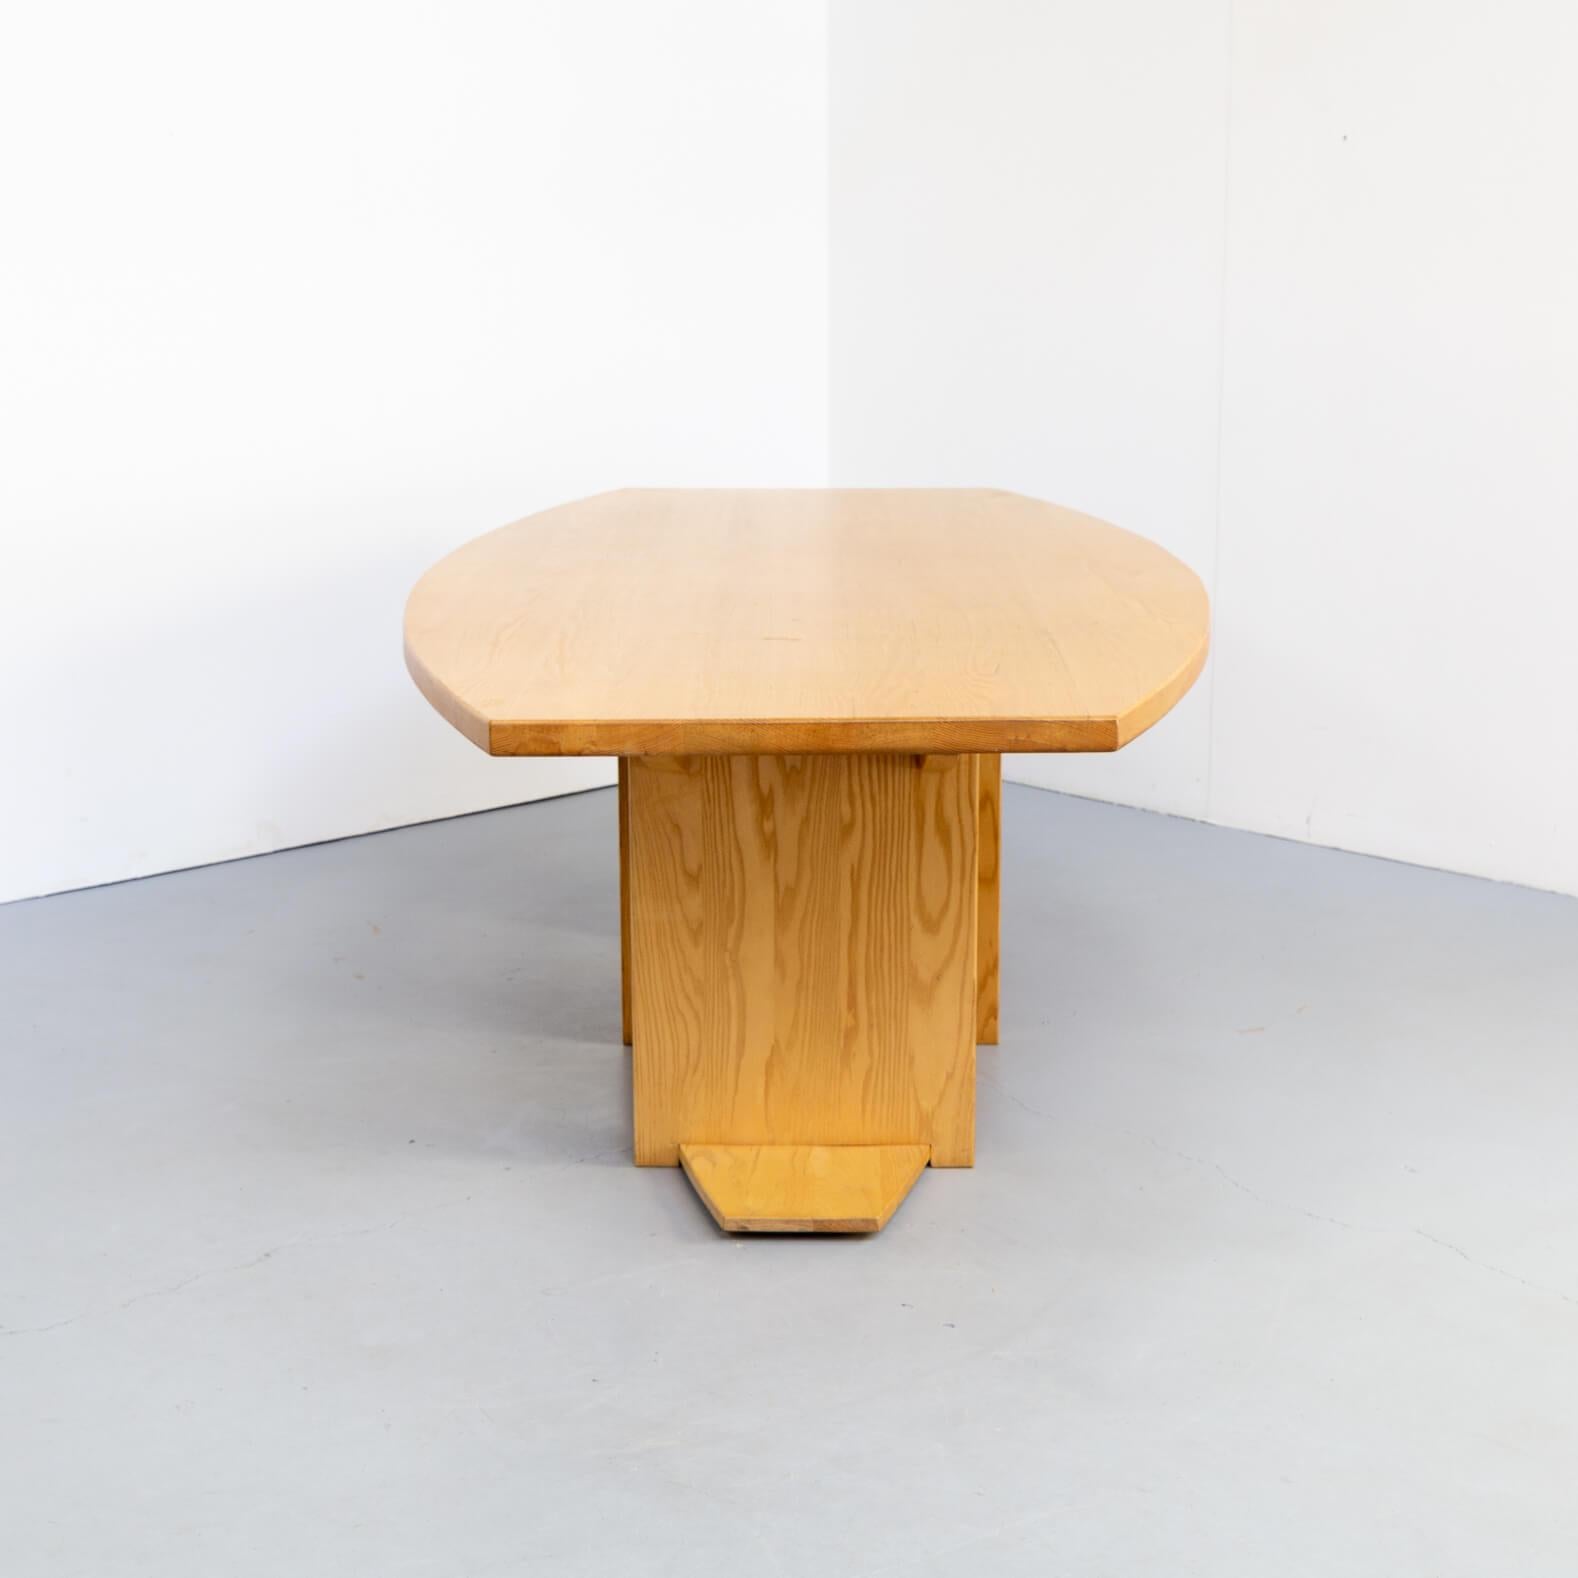 Ash wood is a desirable wood structure. Fresh, friendly and luxury. This table has a slight oval form and is architectural developed for in house use of a private collectioneer. The table easily fits 4 chairs at the long side but also on the